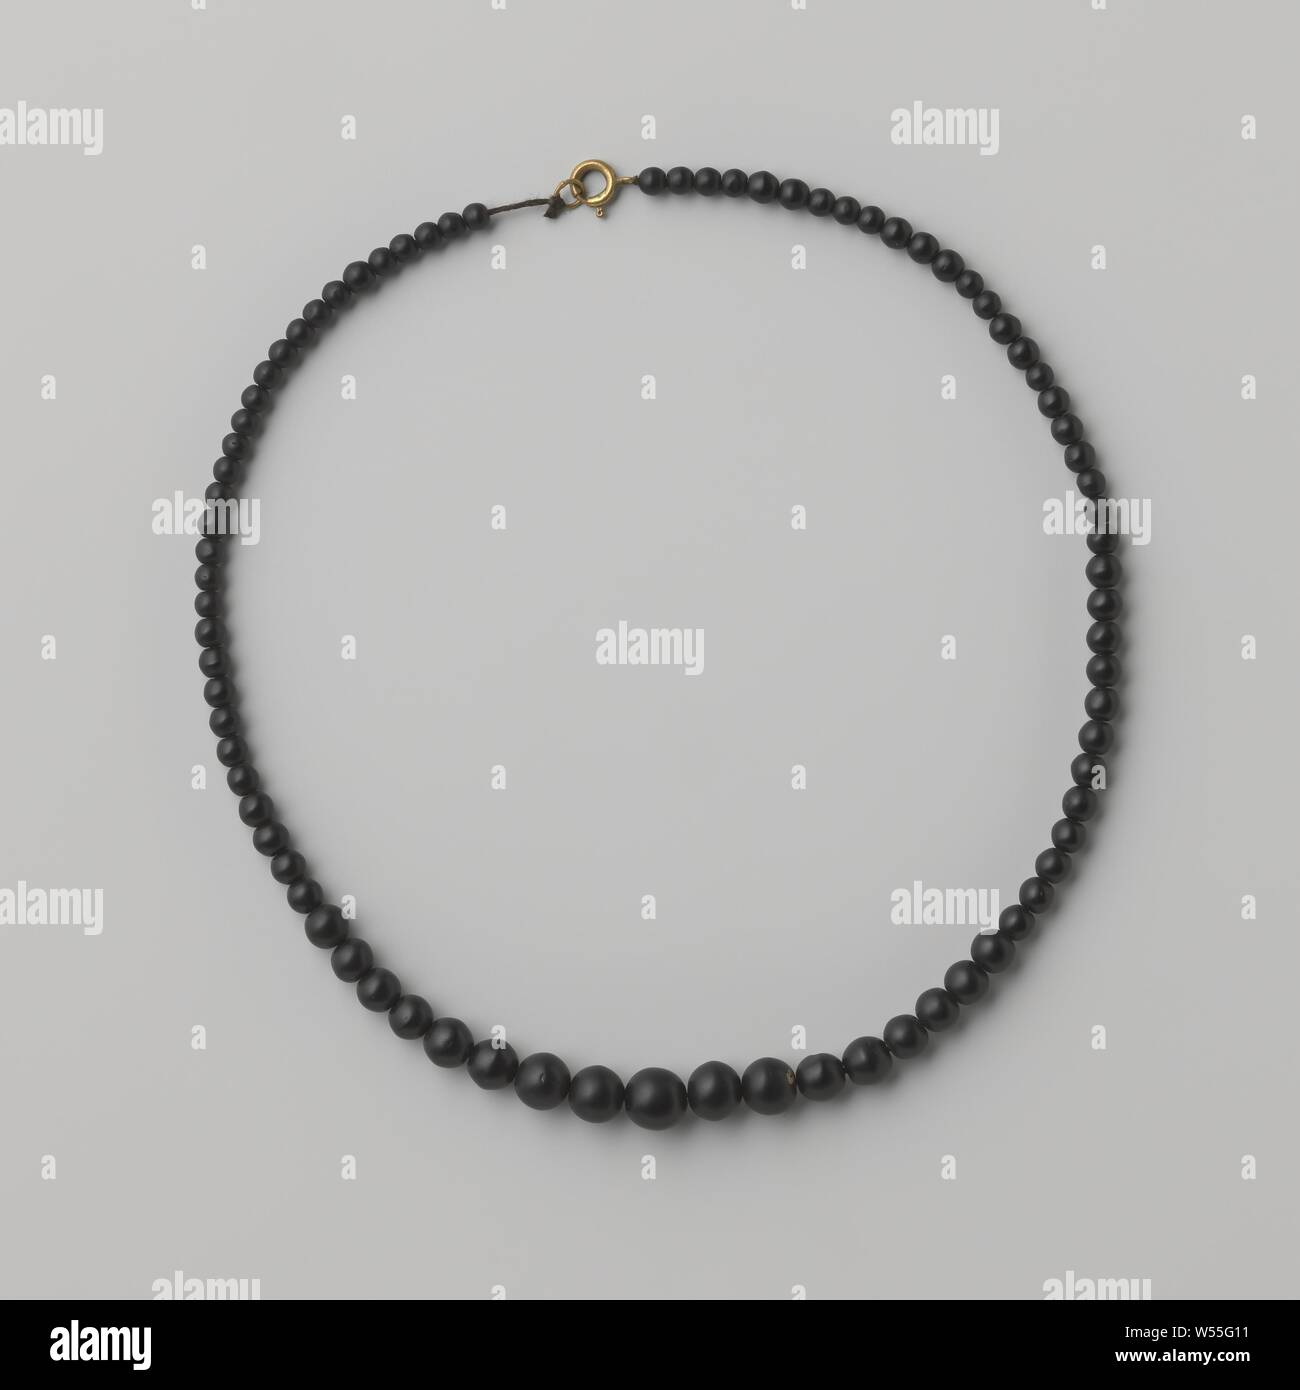 Mourning necklace with round beads of black glass, Mourning necklace with round beads of black glass with a gold colored clasp with spring ring. The beads are smaller towards the closure., anonymous, Europe, c. 1880 - c. 1900, glass, silver (metal), basting, c 46 cm × d 1 cm Stock Photo